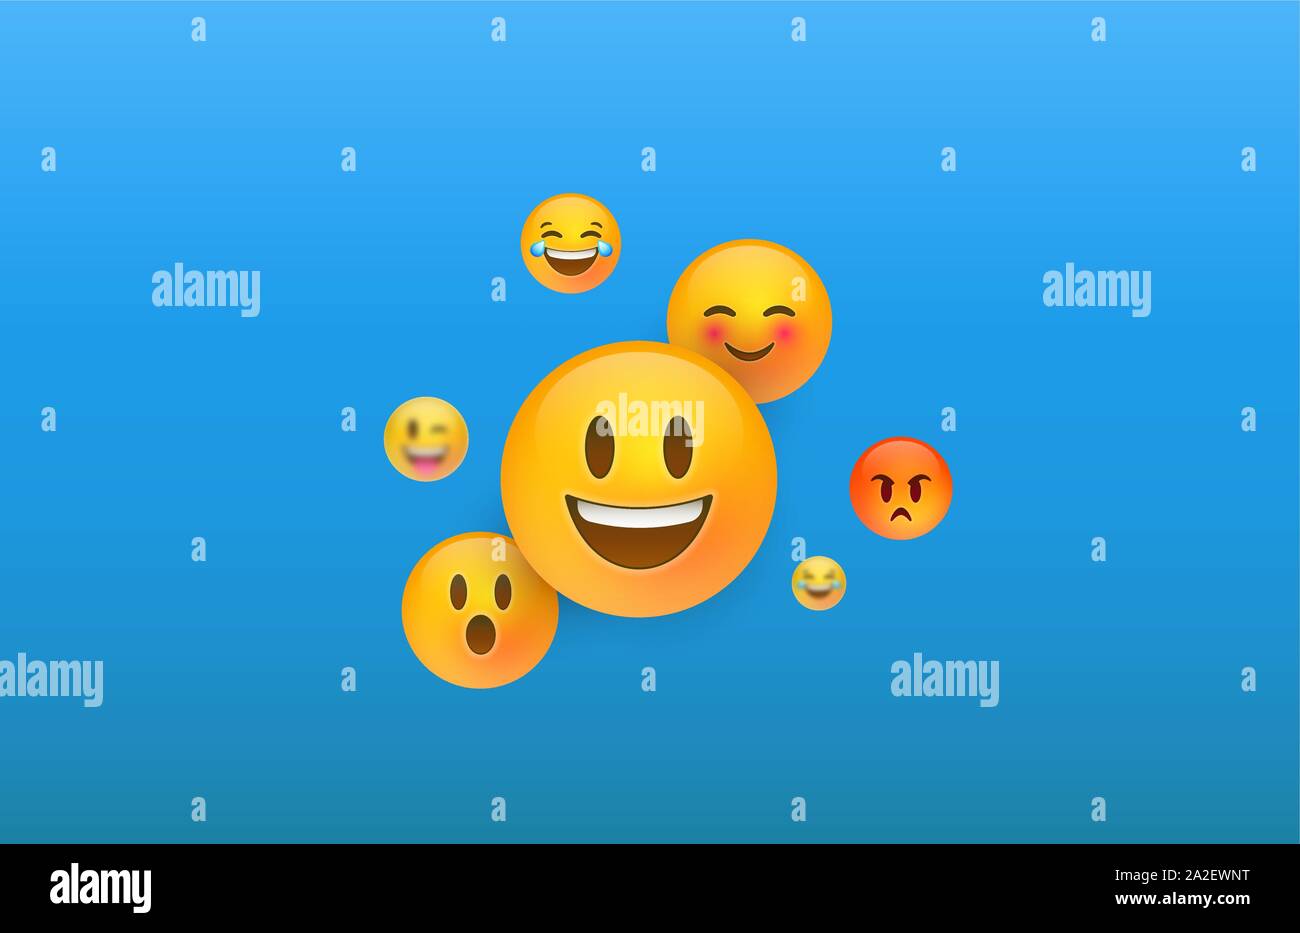 Fun yellow emoticon faces background. 3D social smiley face icons includes happy, cute and funny emotion. Stock Vector